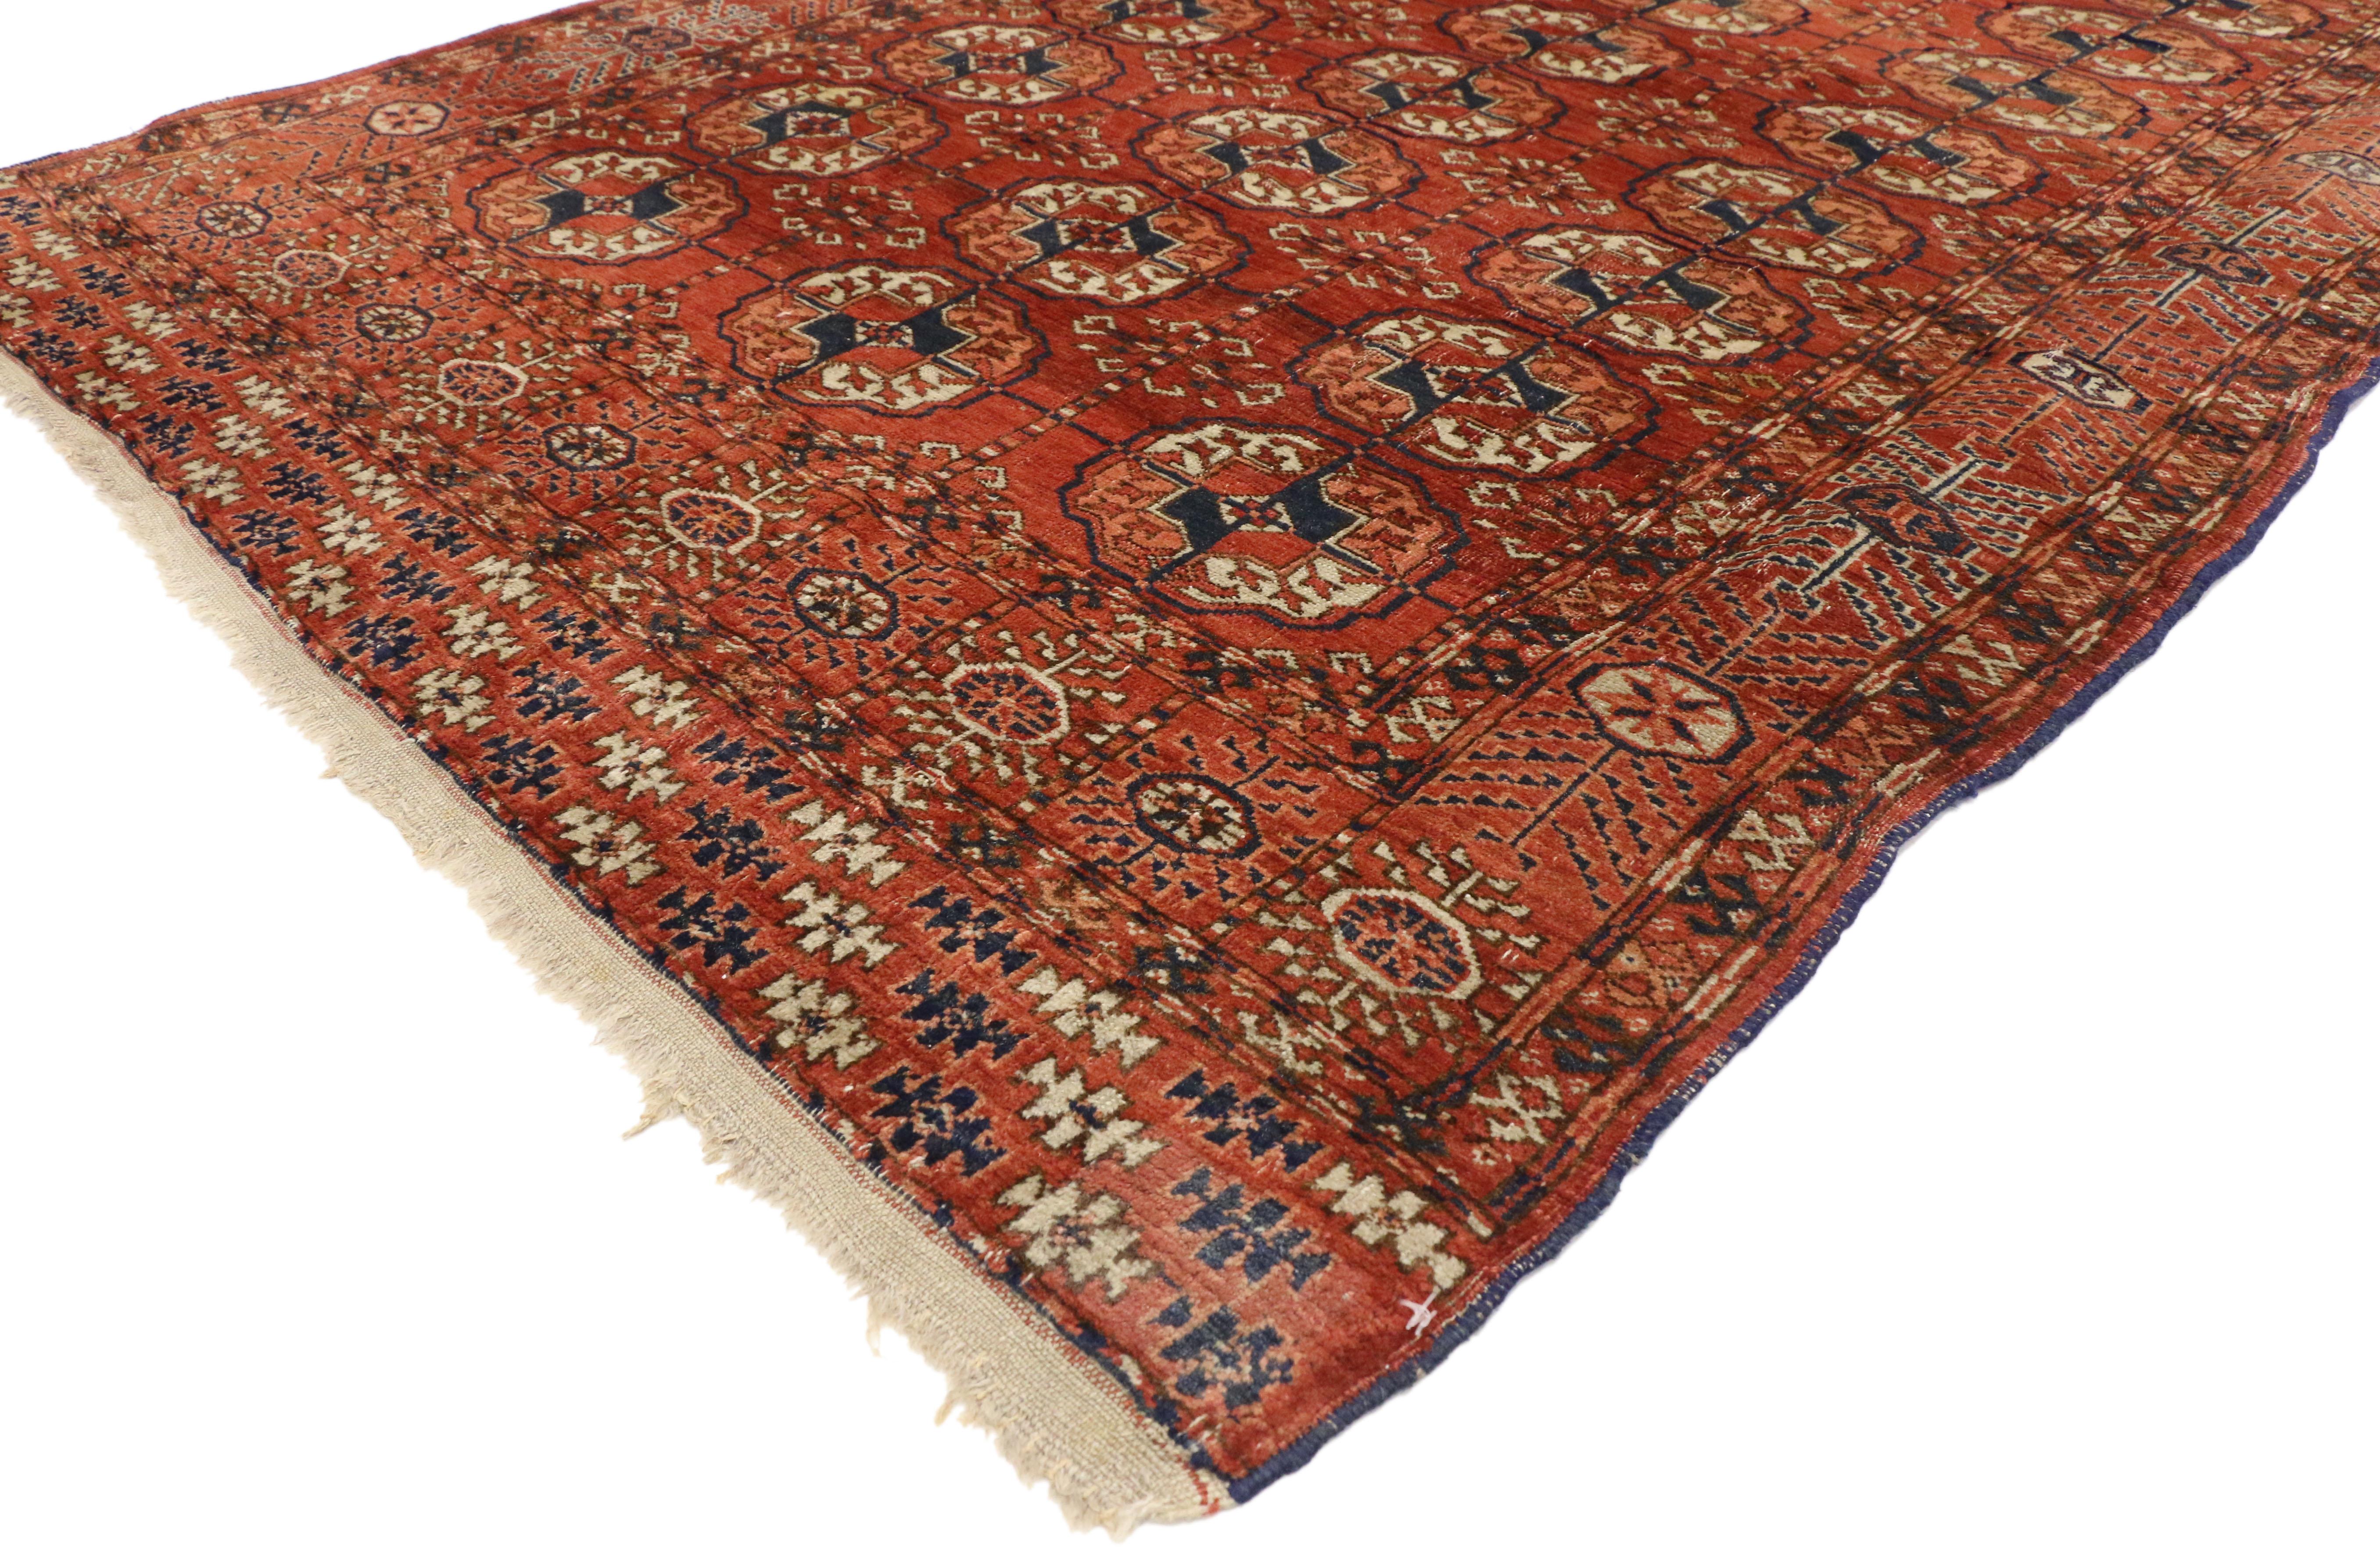 73274, Vintage Turkmen Rug with Modern Tribal Style, Tekke Accent Rug, Turkoman Rug. This hand knotted wool vintage Turkmen rug features three columns of Tekke güls with secondary stylized Chemche güls spread across an abrashed red field. The main